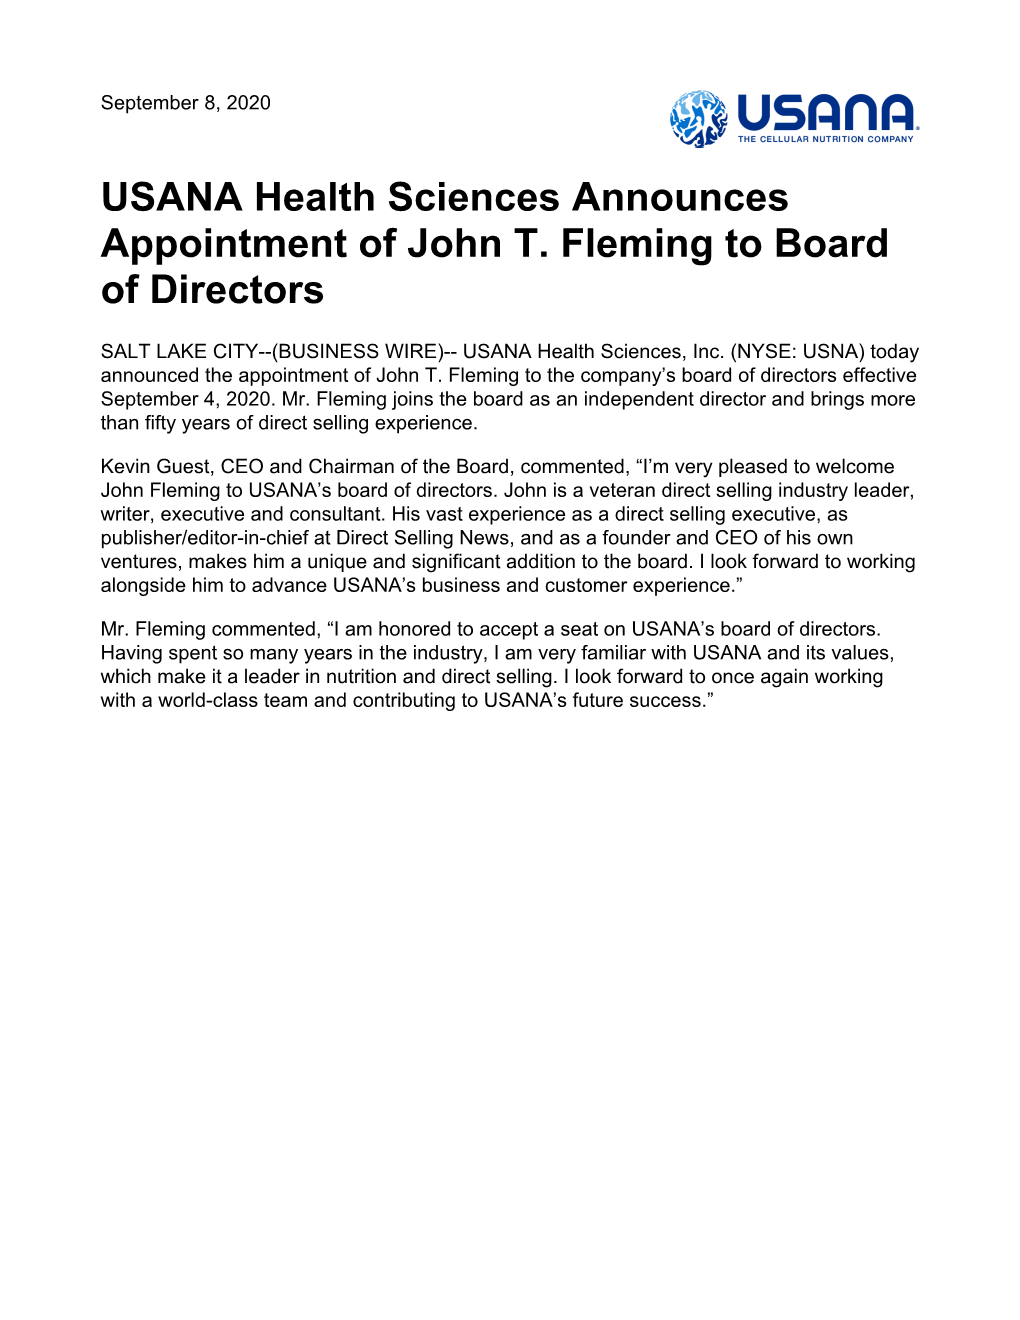 USANA Health Sciences Announces Appointment of John T. Fleming to Board of Directors